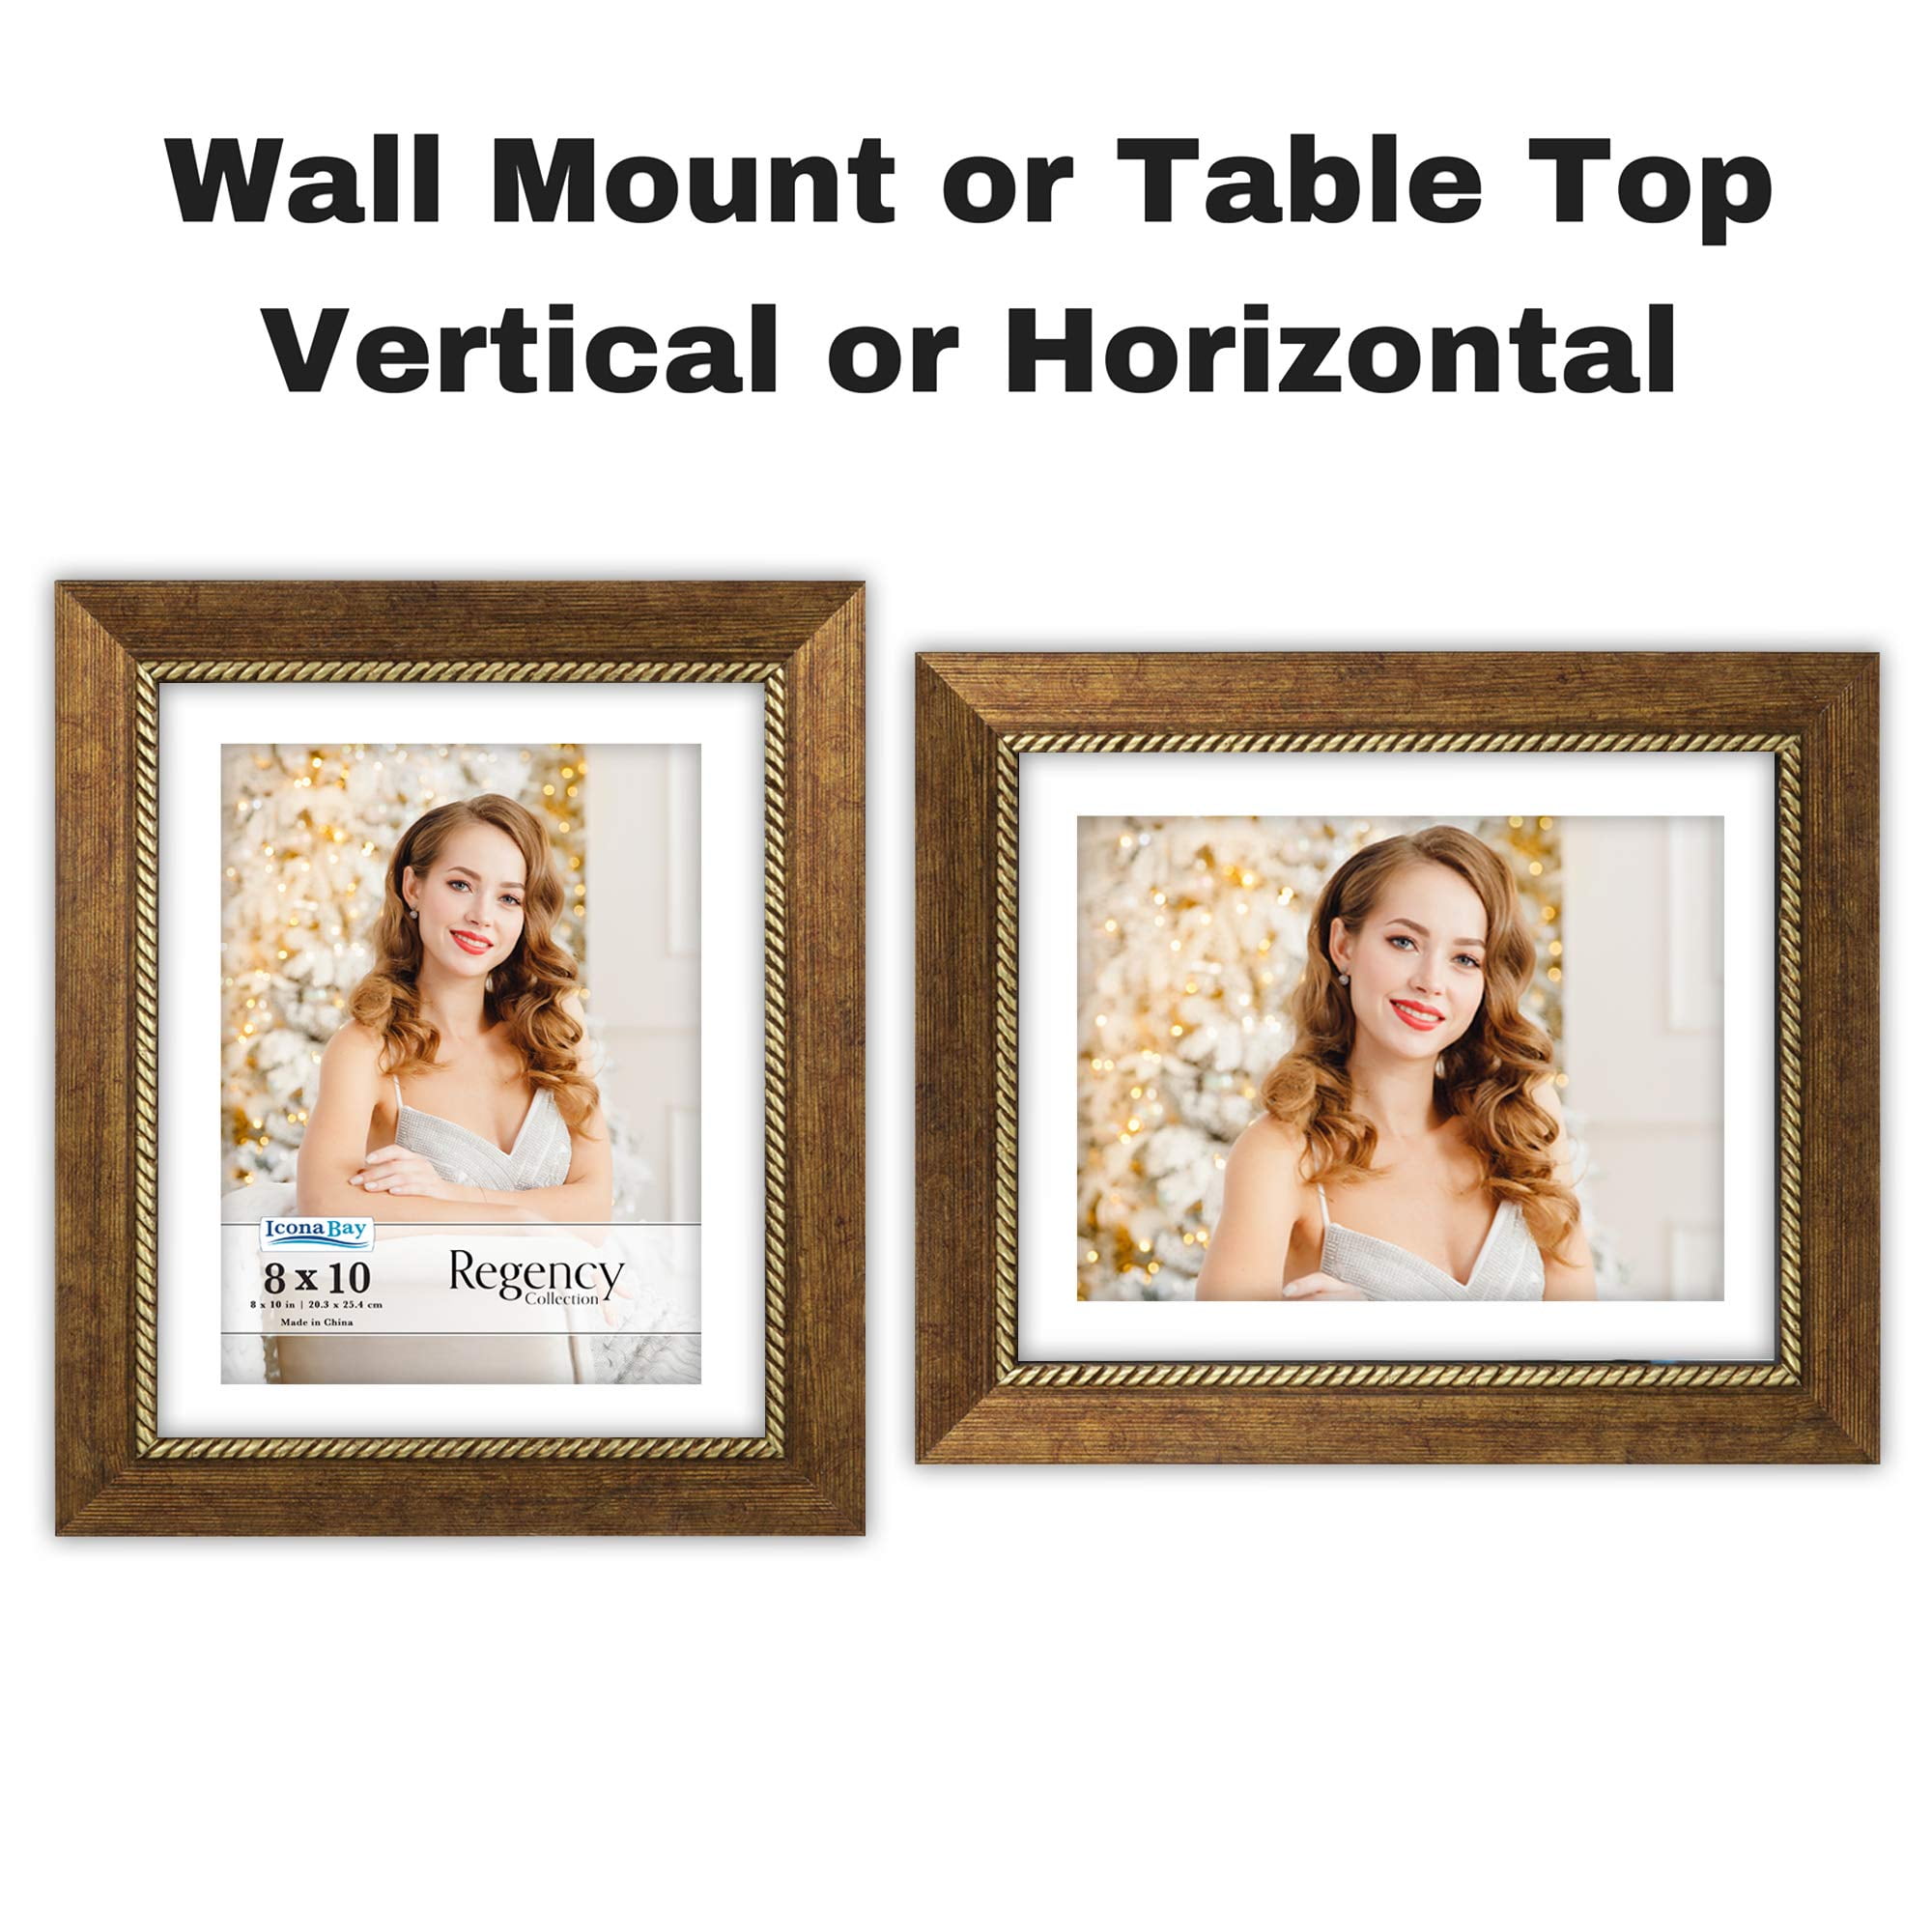 Wall Mount or Table Top Icona Bay 8x10 w/Mat Picture Frames Baroque Style Photo Frames 8 x 10 Regency Collection 20x25 cm Silver, 6 Pack